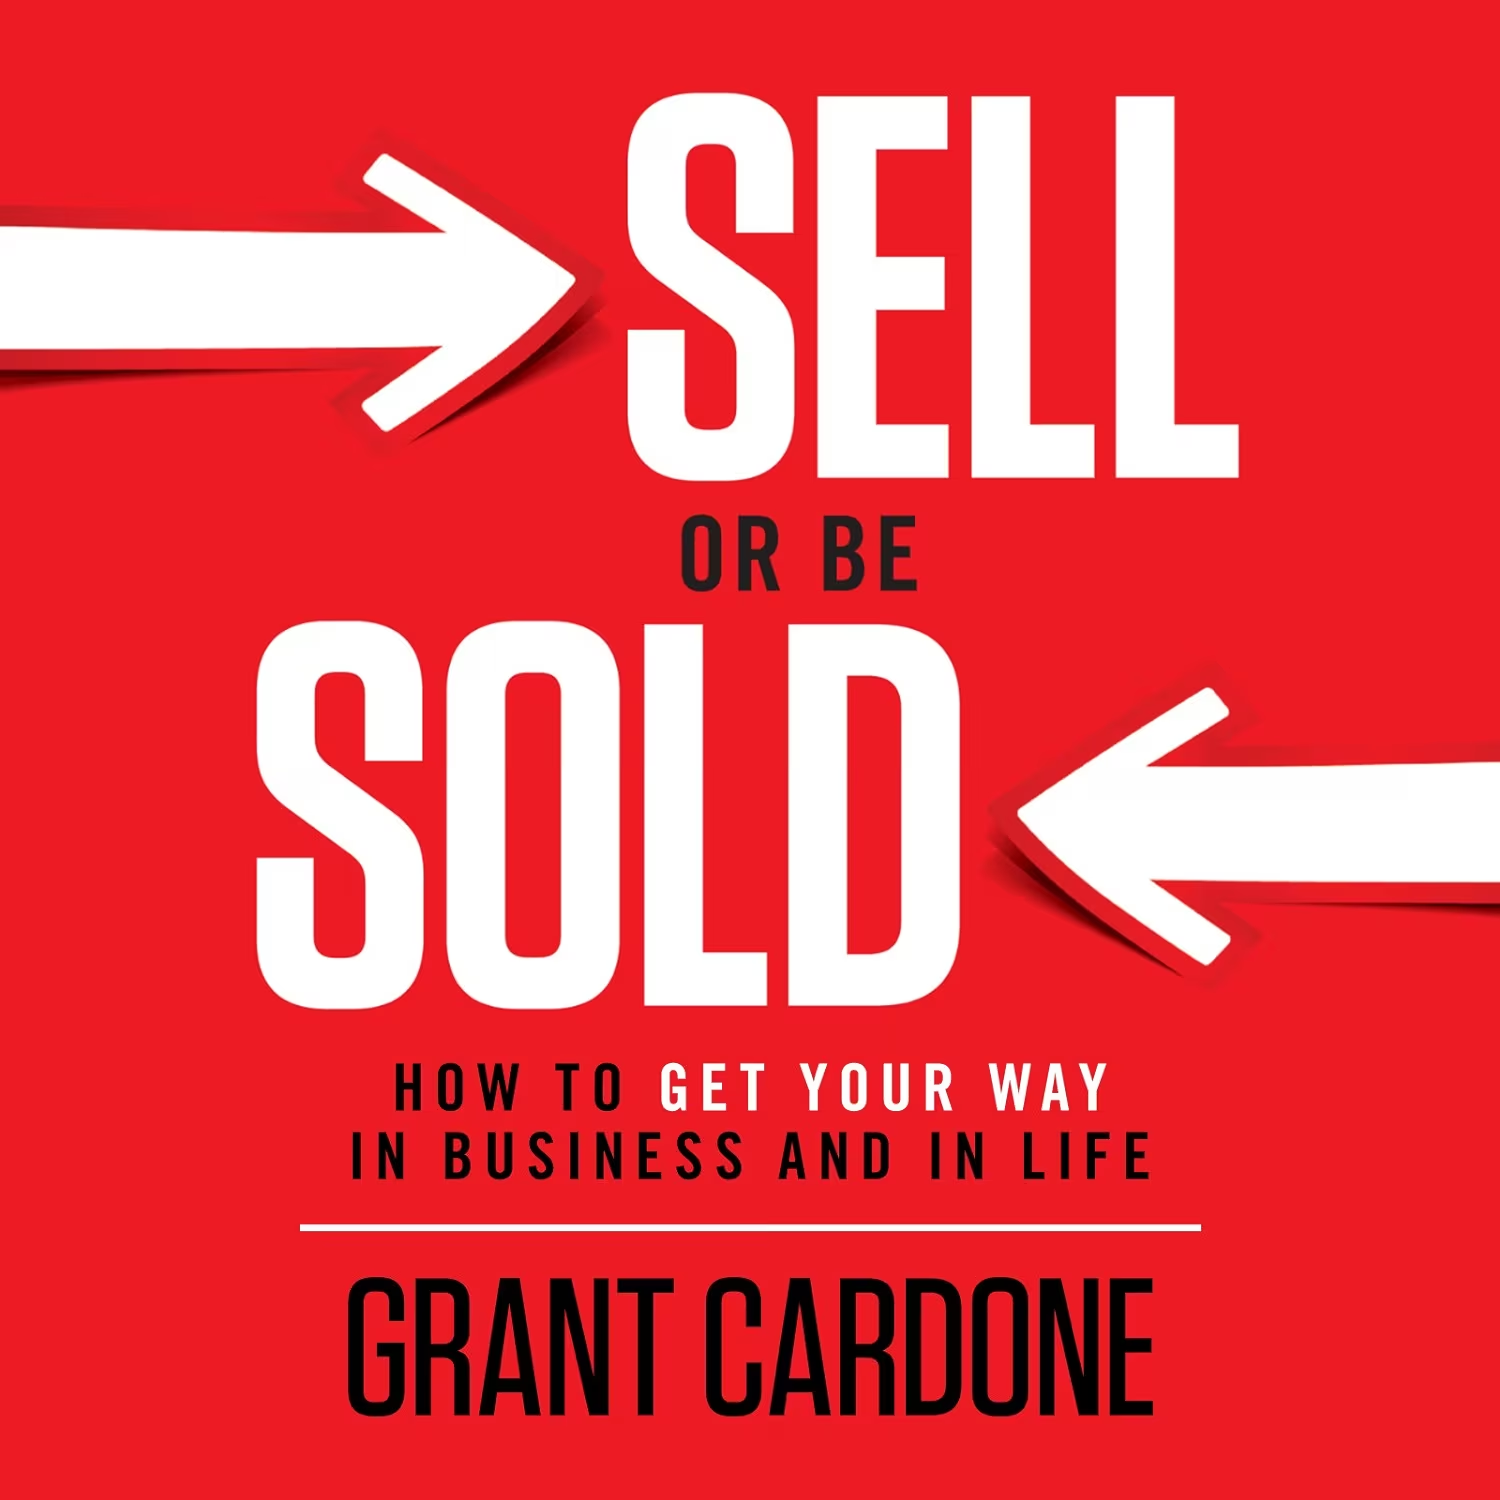 Sell or Be Sold: How to Get Your Way in Business and Life by Grant Cardone